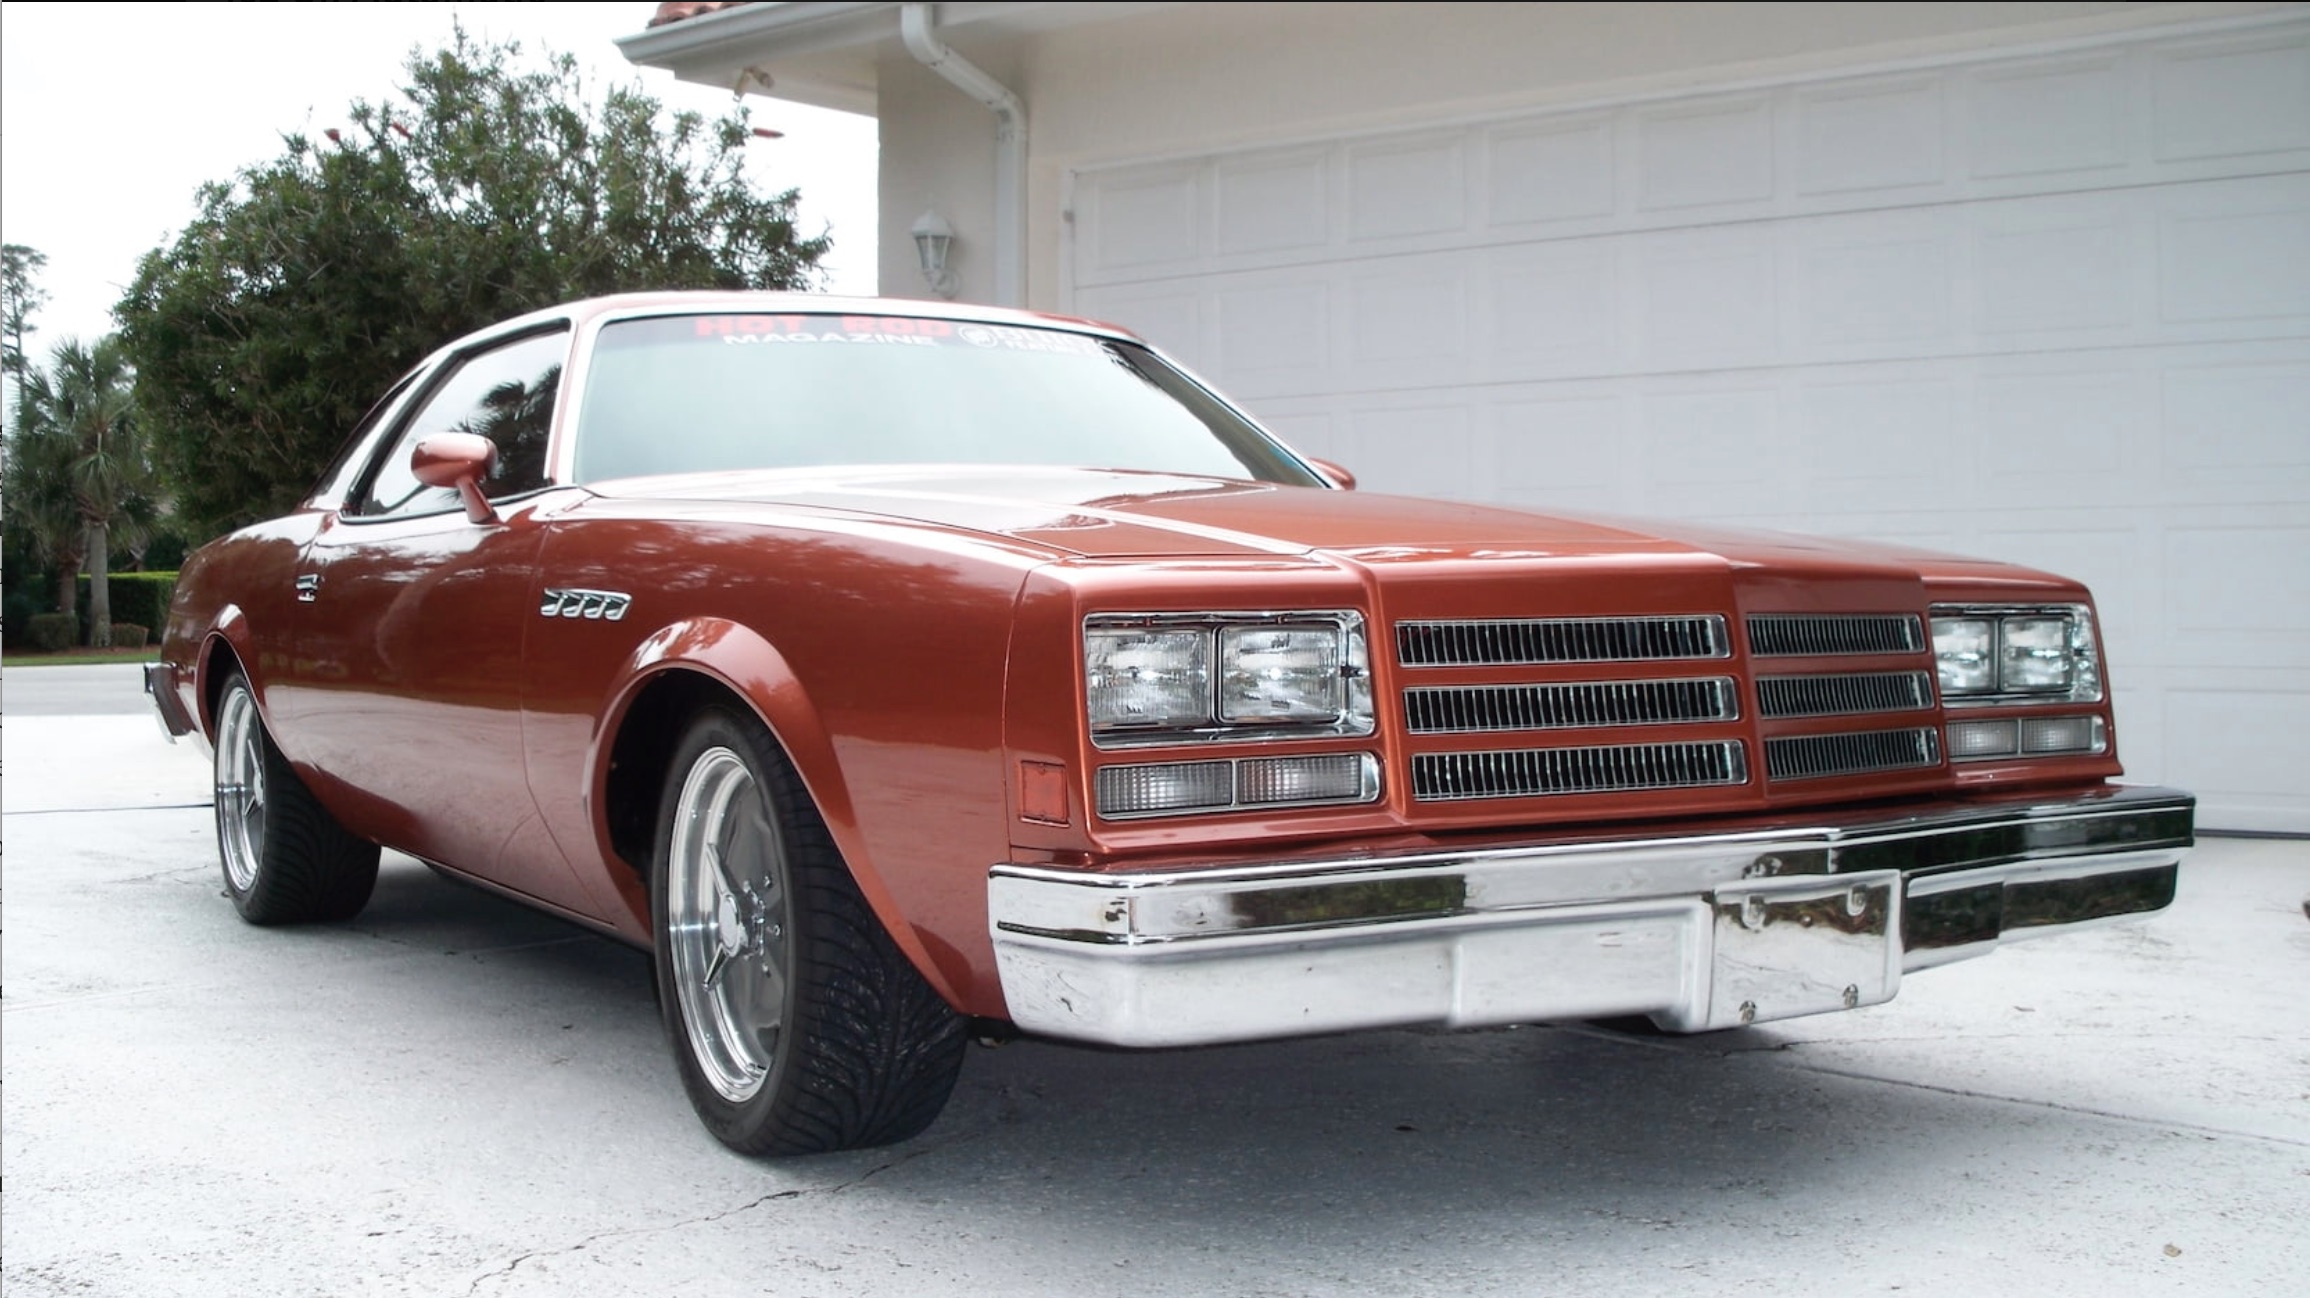 Money No Object: 1977 Buick Century – Less Can Be More